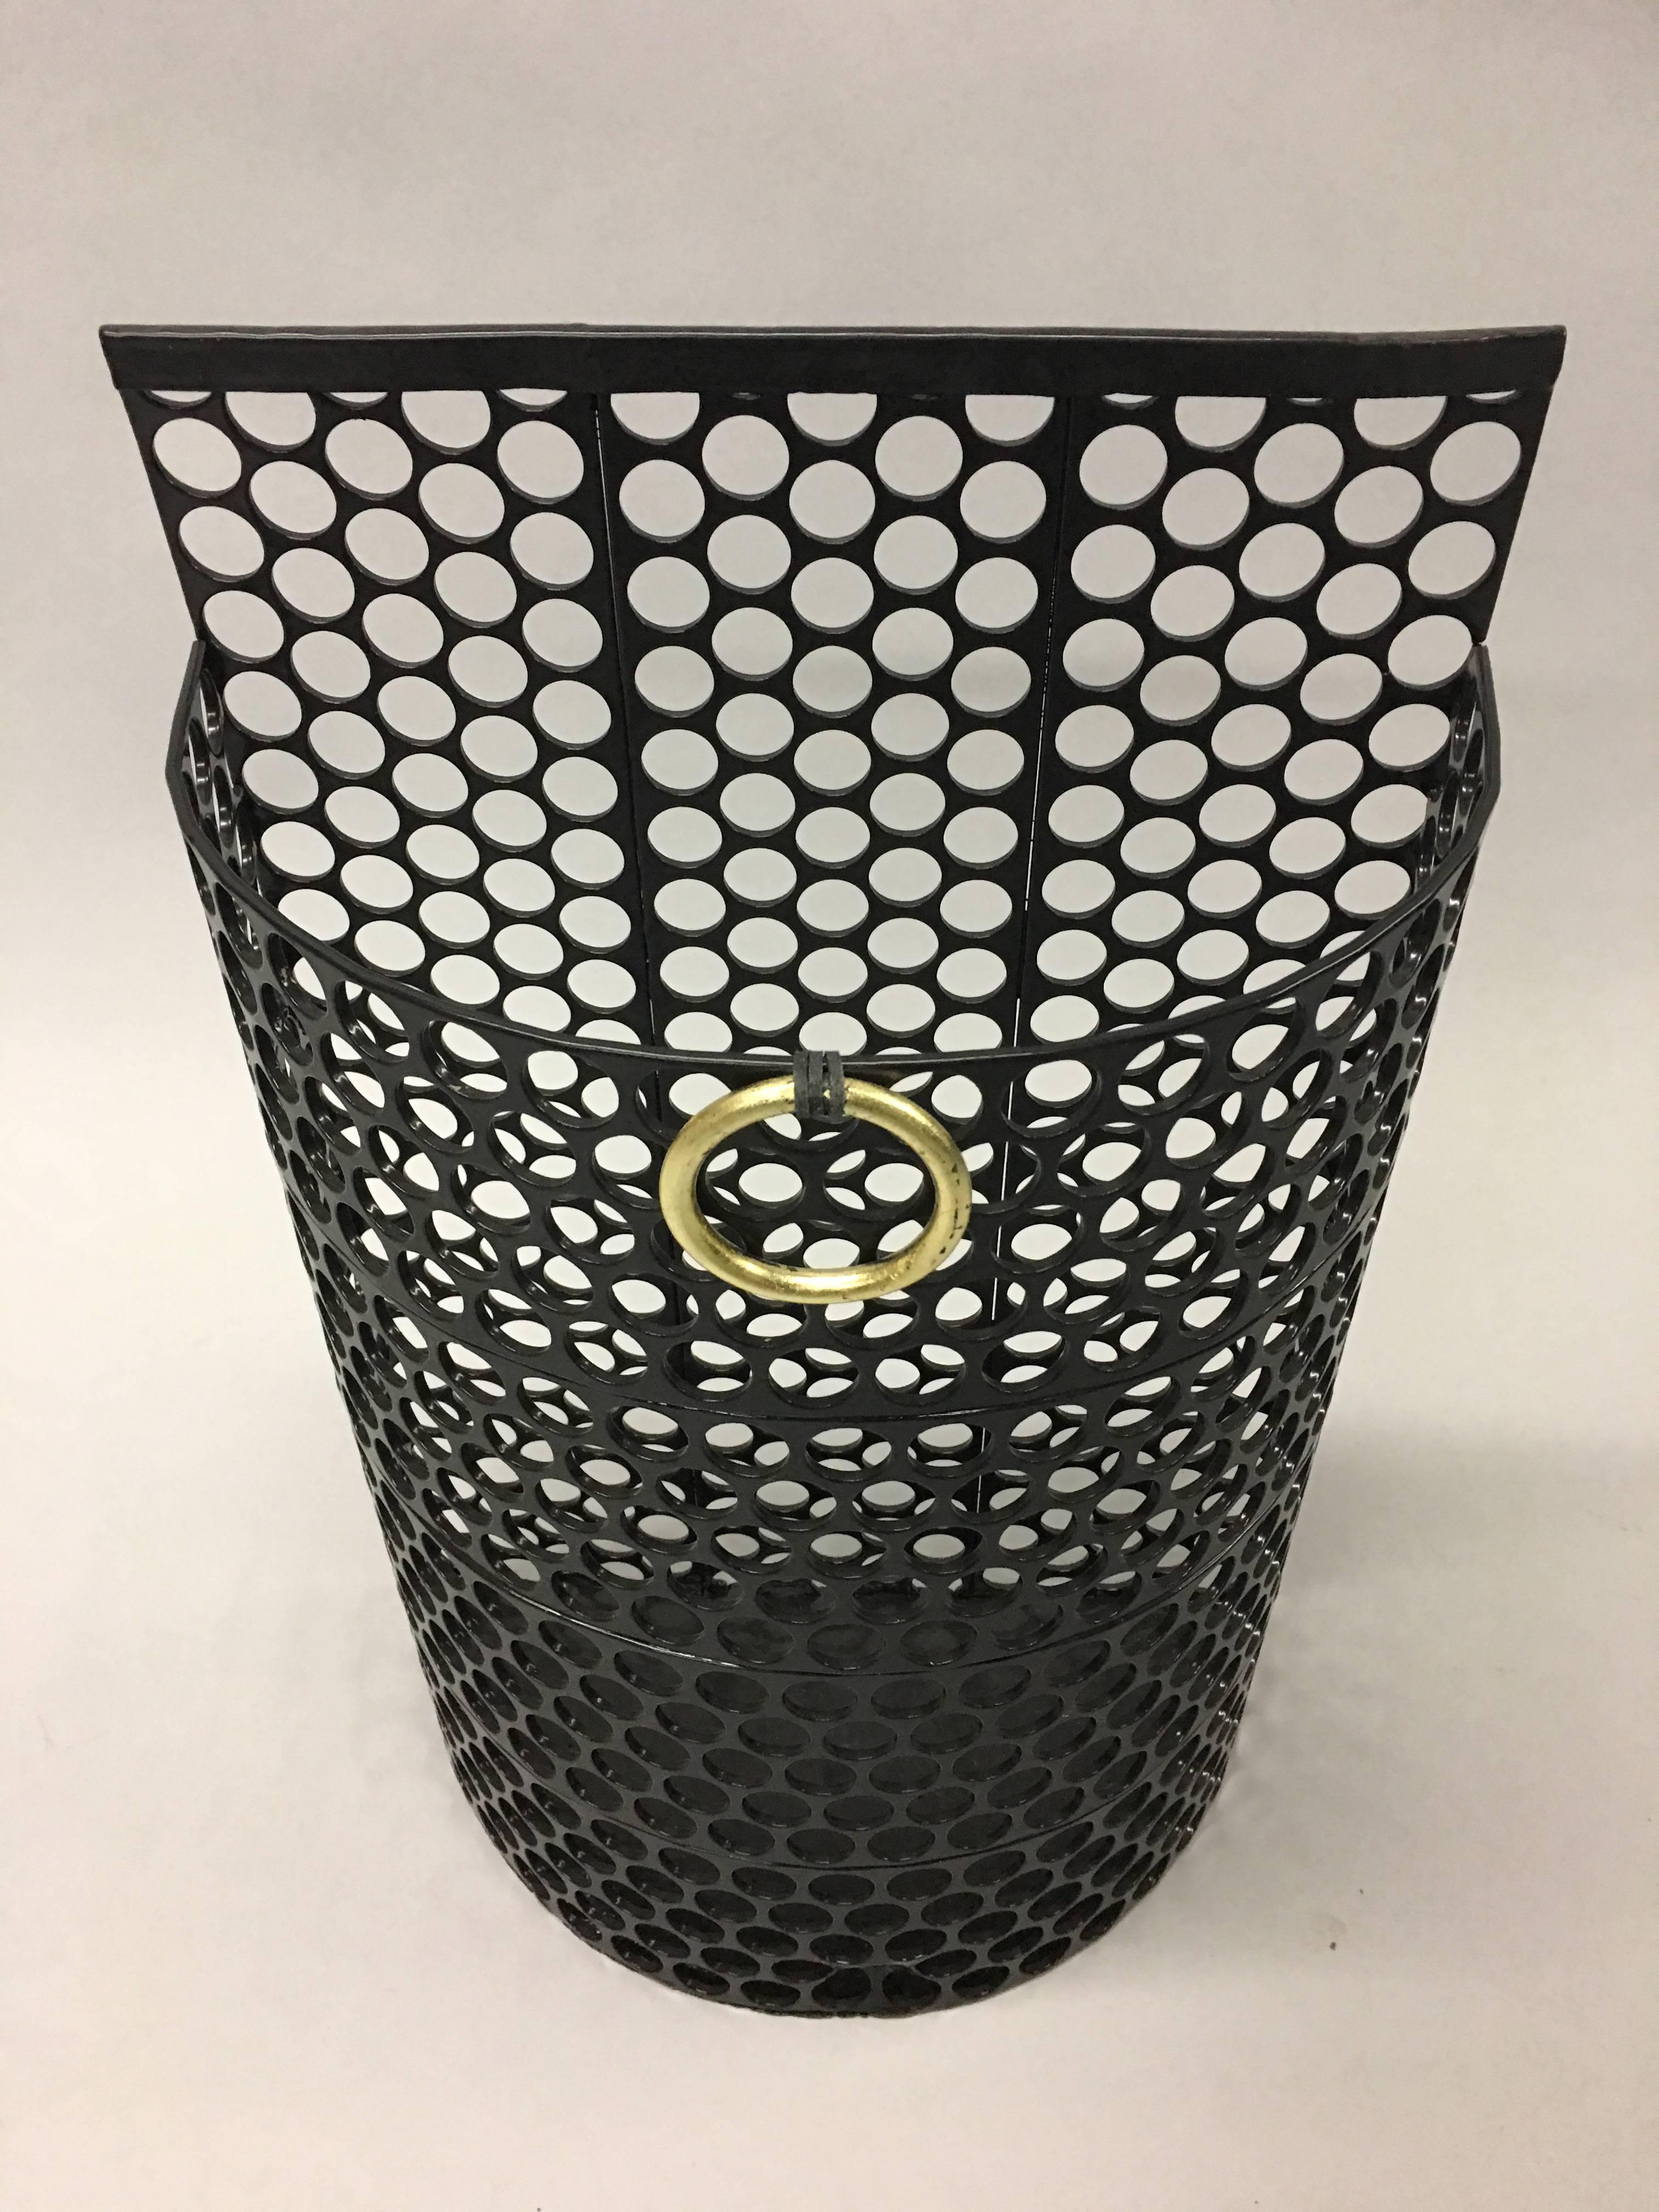 French Mid-Century Modern umbrella stand or trash / wastebasket composed of black enameled perforated iron / steel adorned with an elegant gilt iron ring pull in the style of Jacques Adnet, circa 1950.

References: Industrial, Neoclassical, Jean